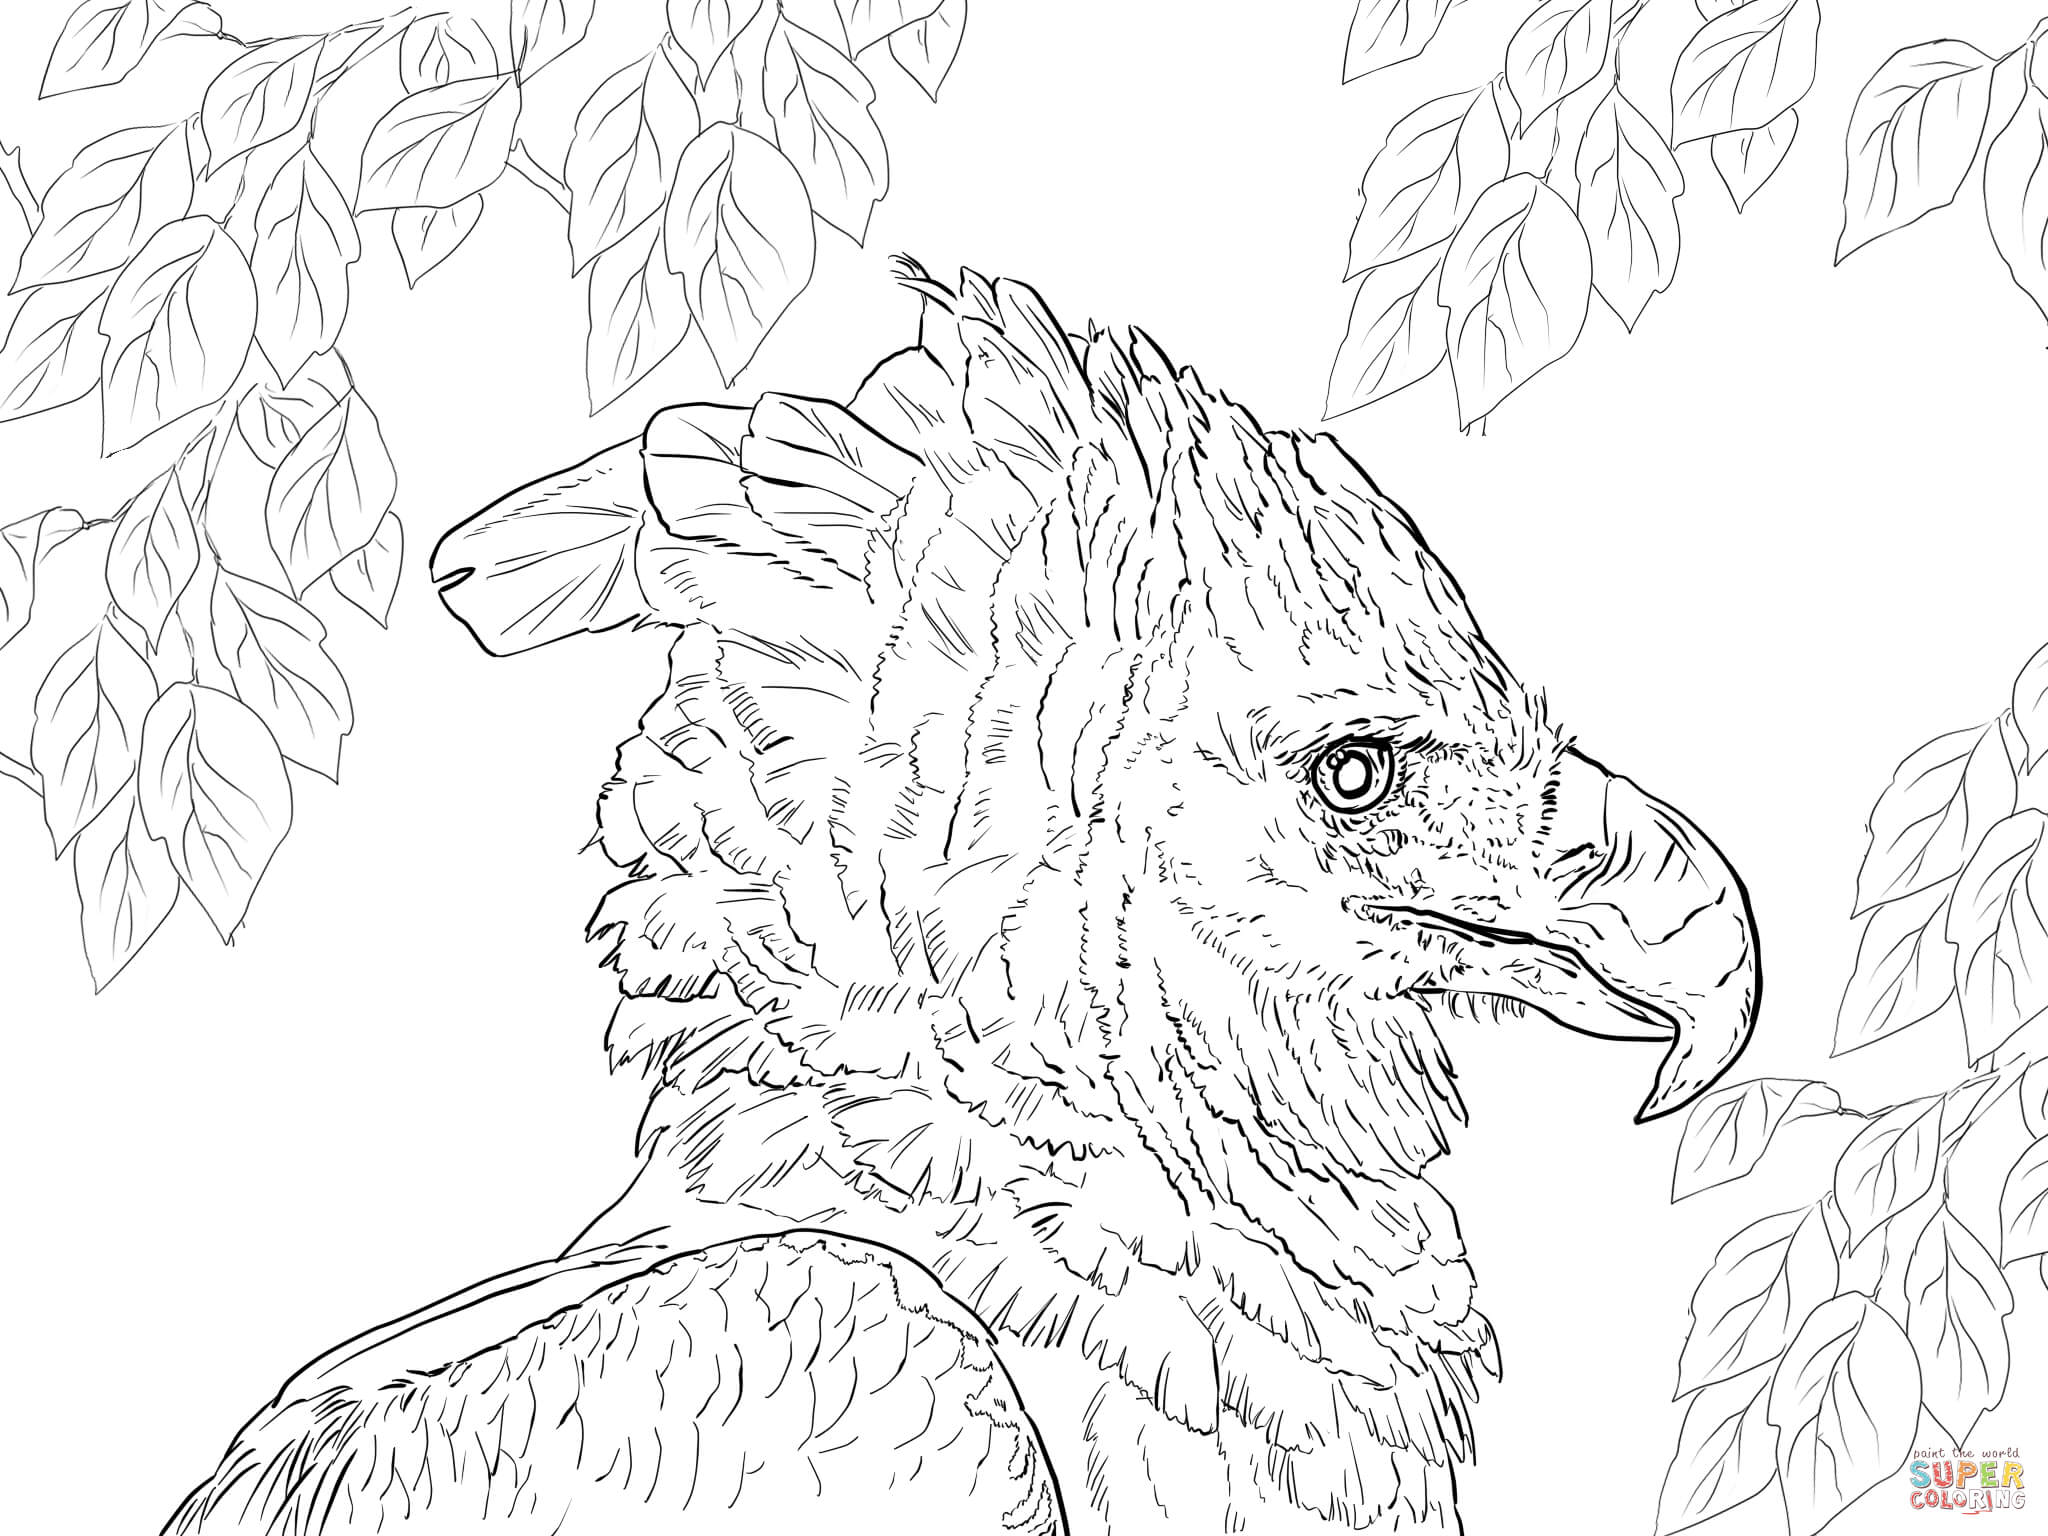 Harpy eagle portrait coloring page free printable coloring pages